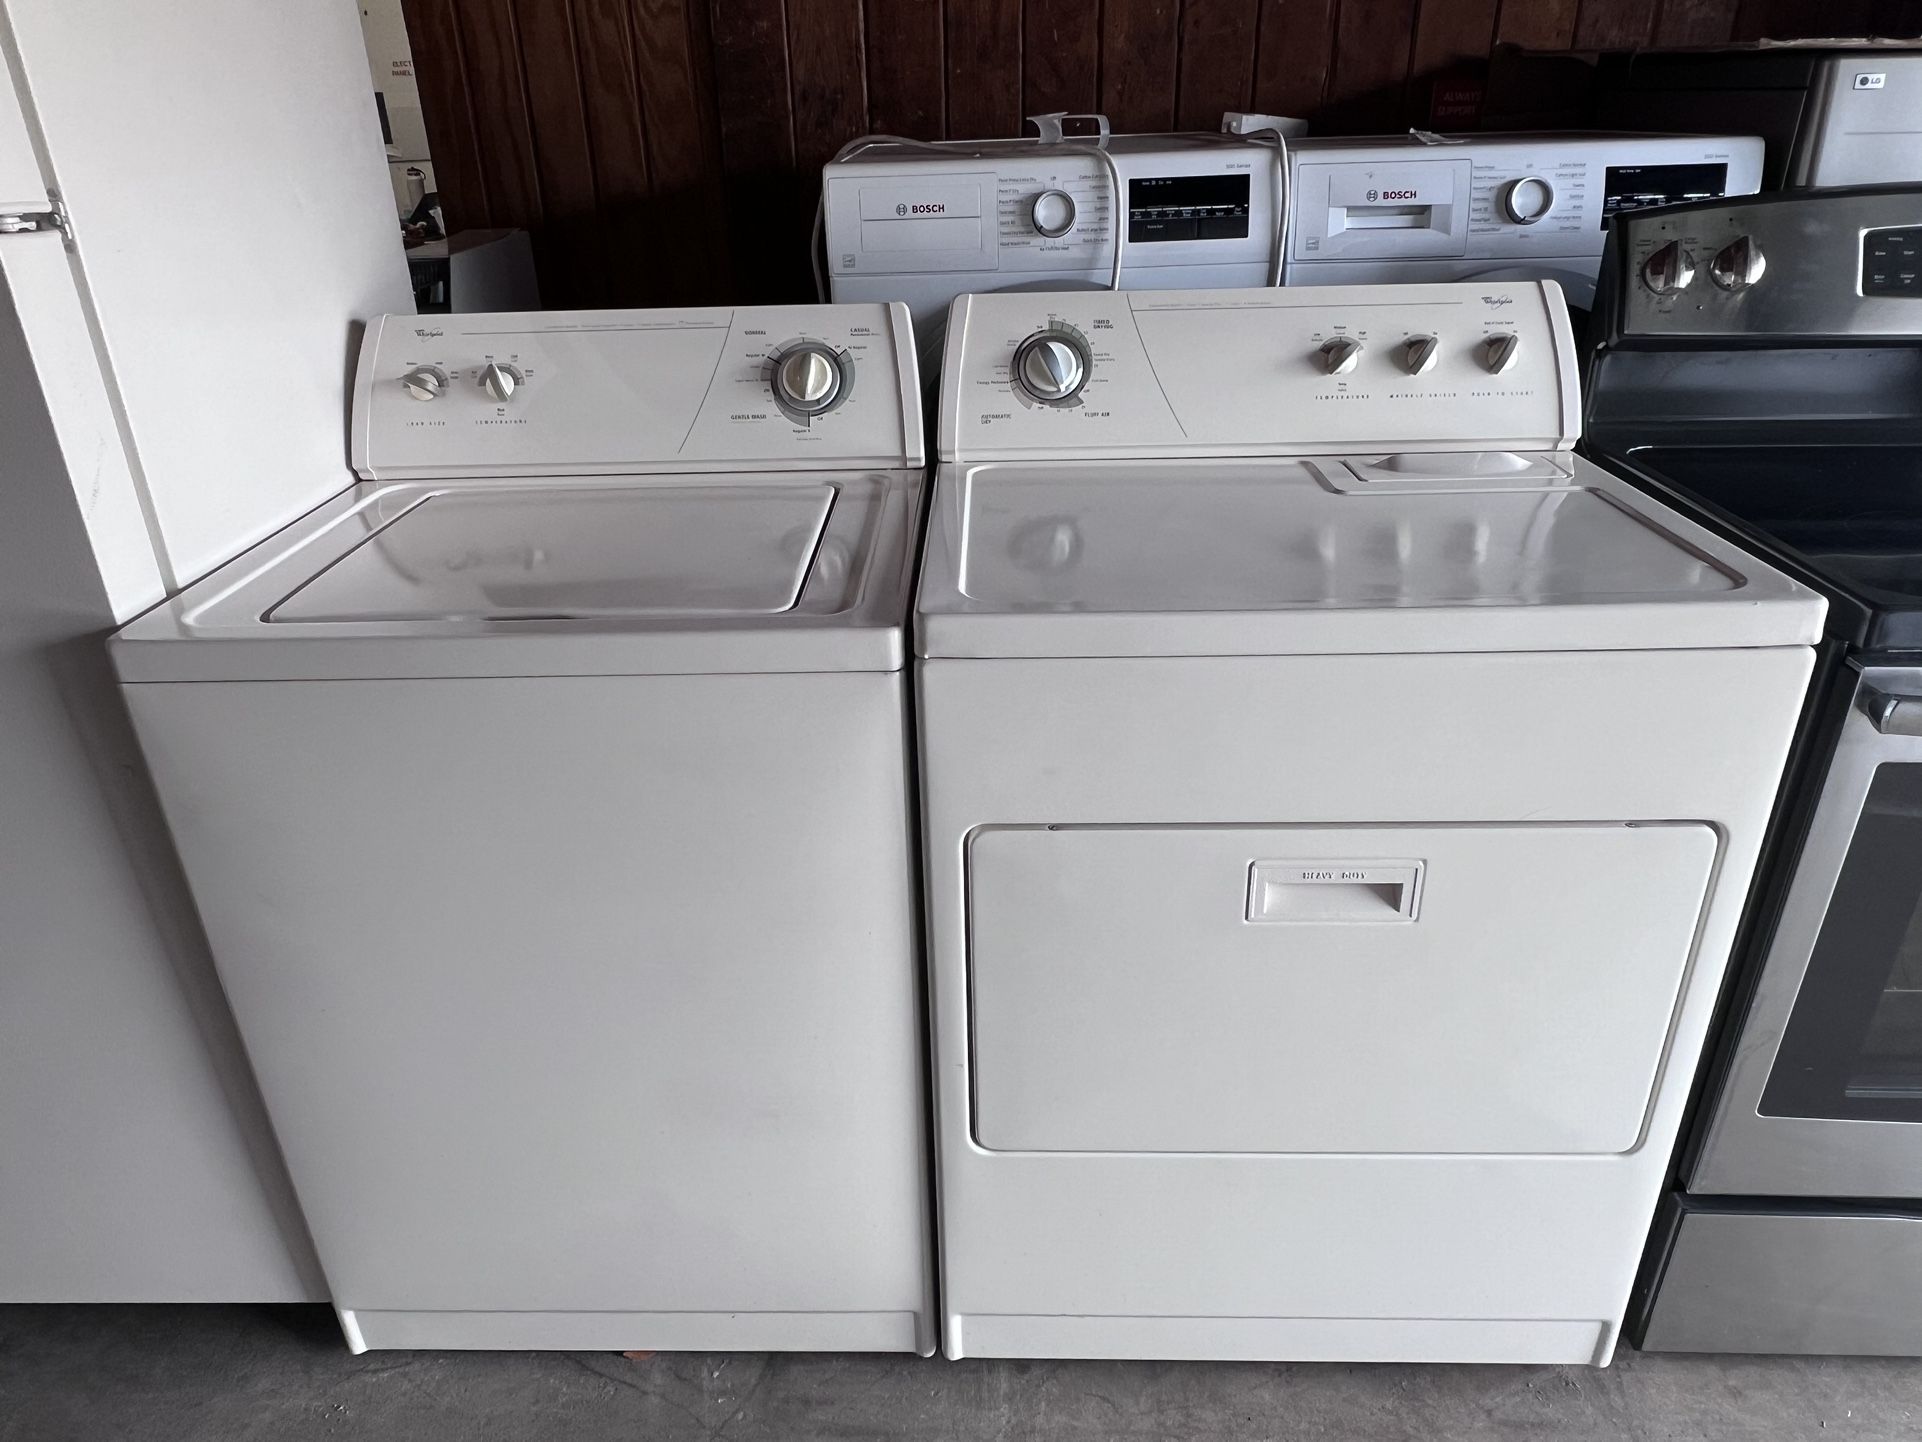 Washer And. Dryer Set Used Great Condition Comes With Warranty 